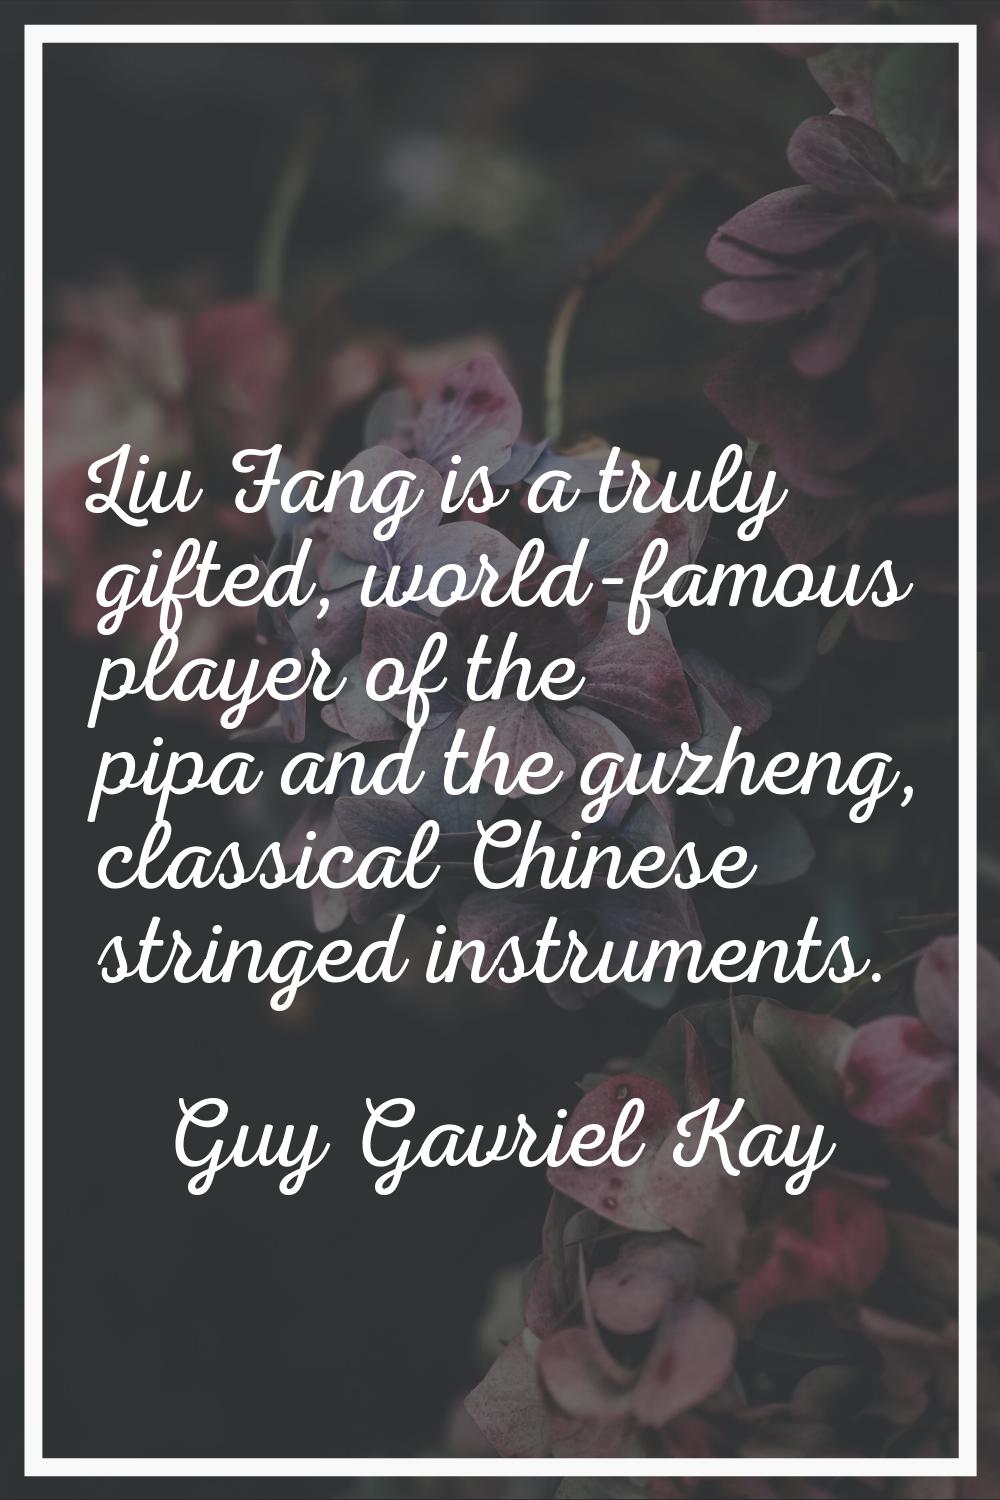 Liu Fang is a truly gifted, world-famous player of the pipa and the guzheng, classical Chinese stri